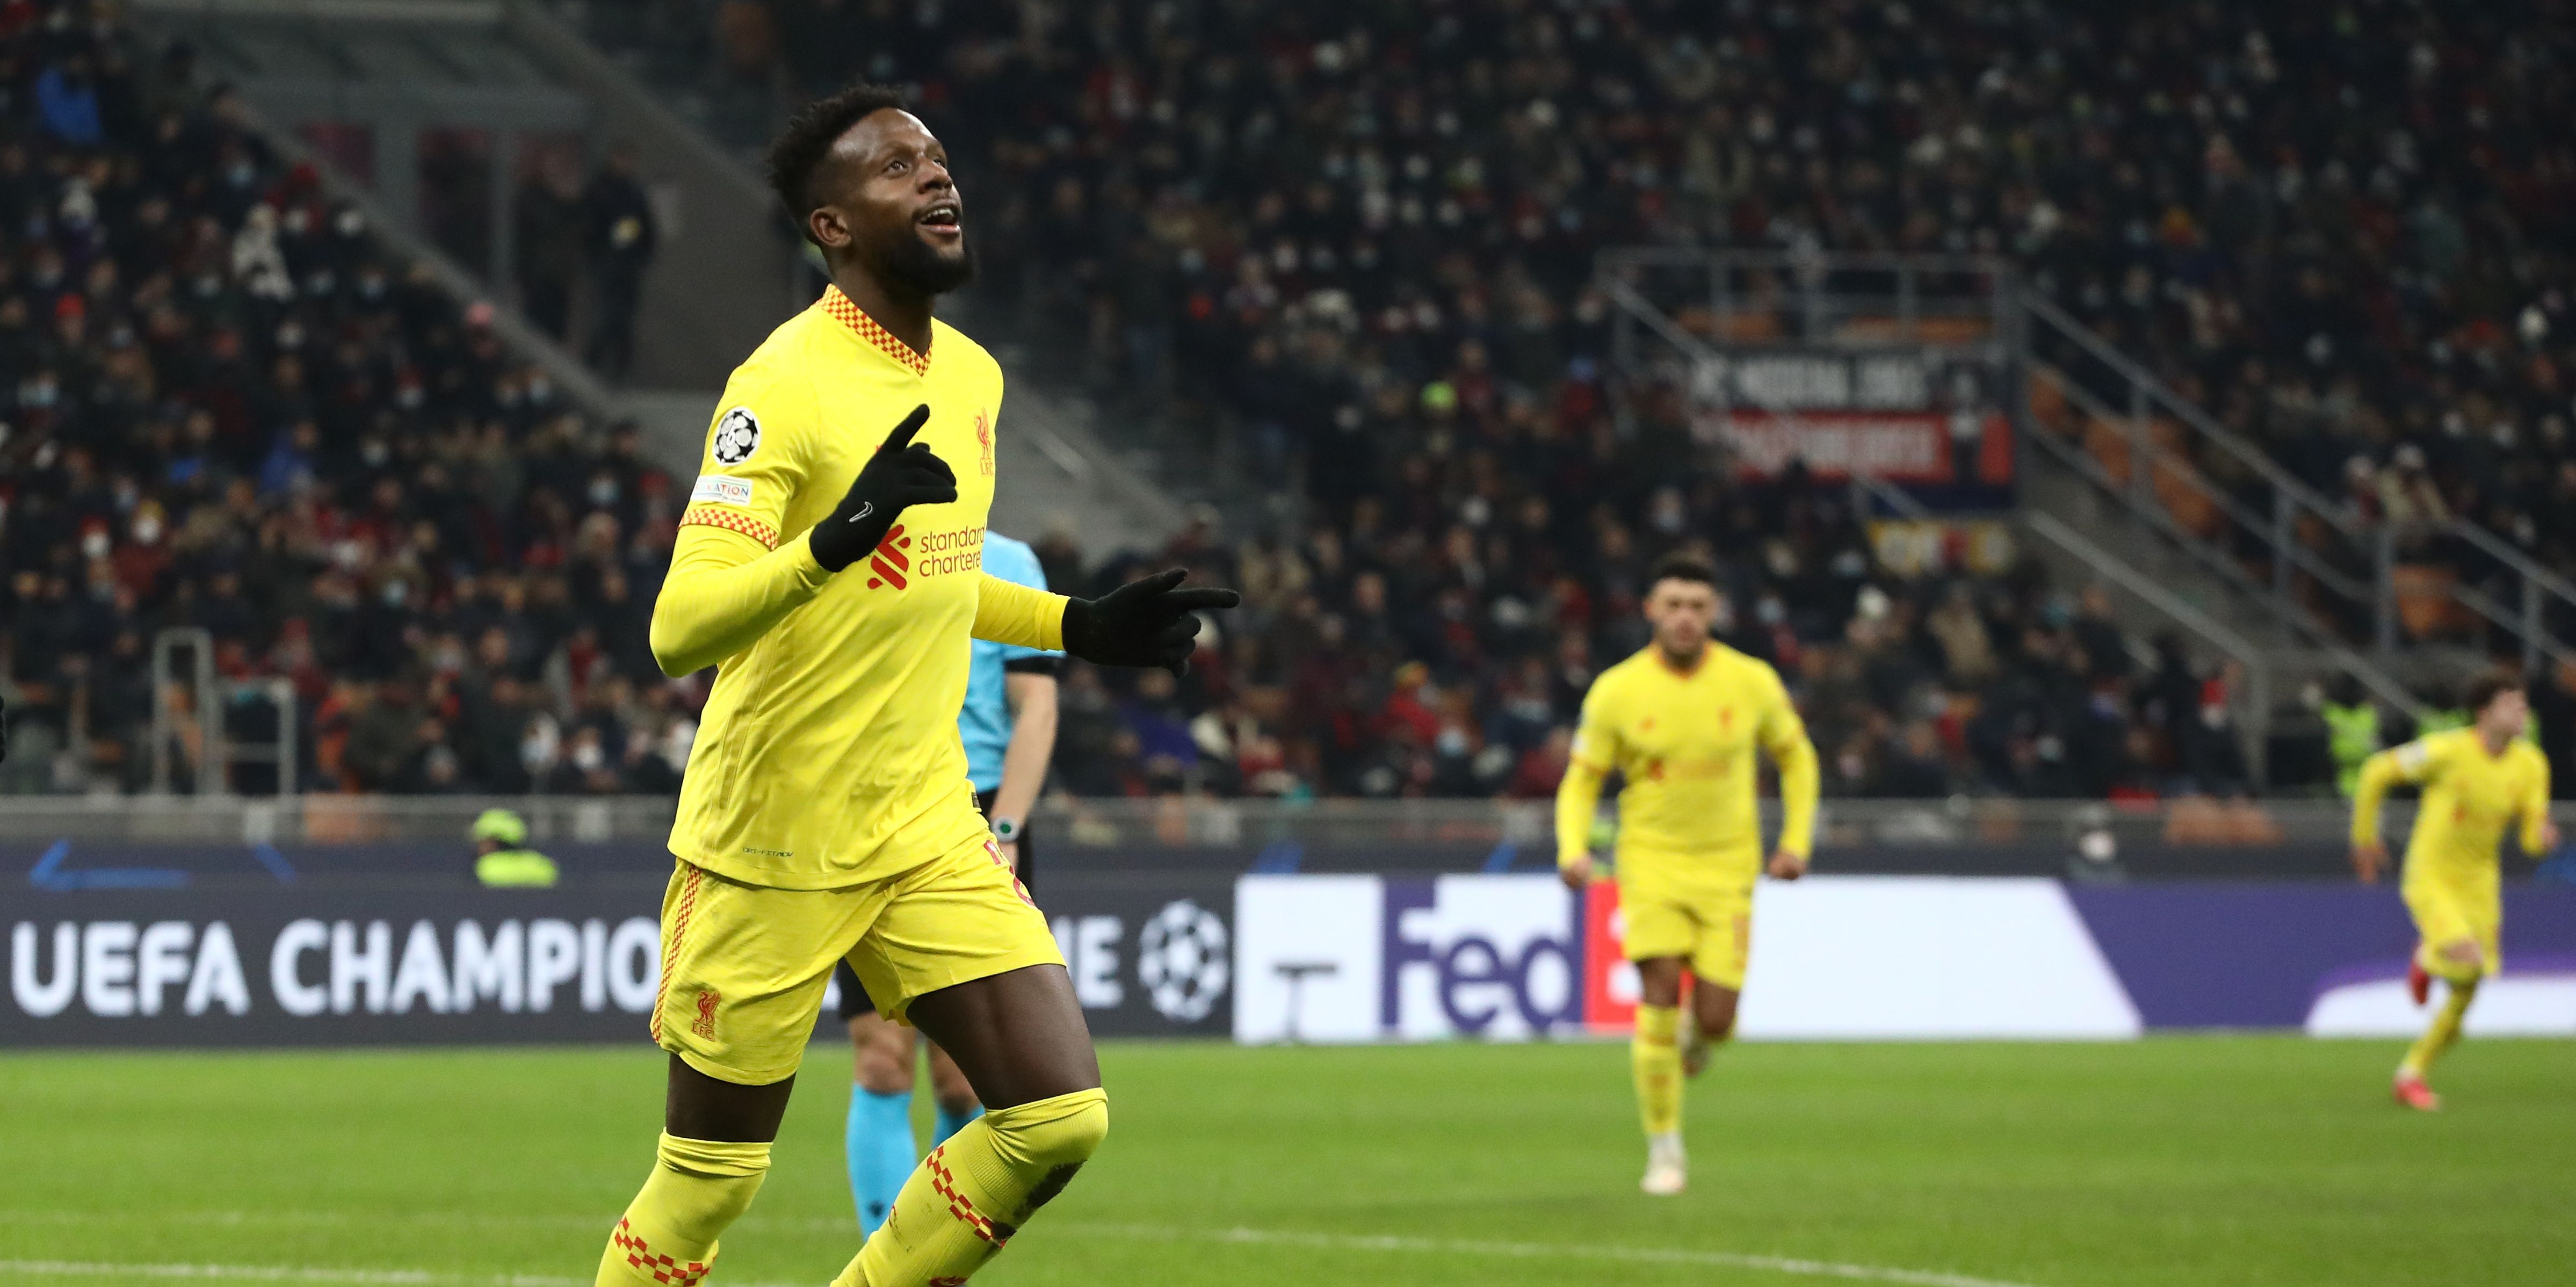 Liverpool identify Origi replacement in versatile 24-year-old Reds could secure for cut-price fee – report